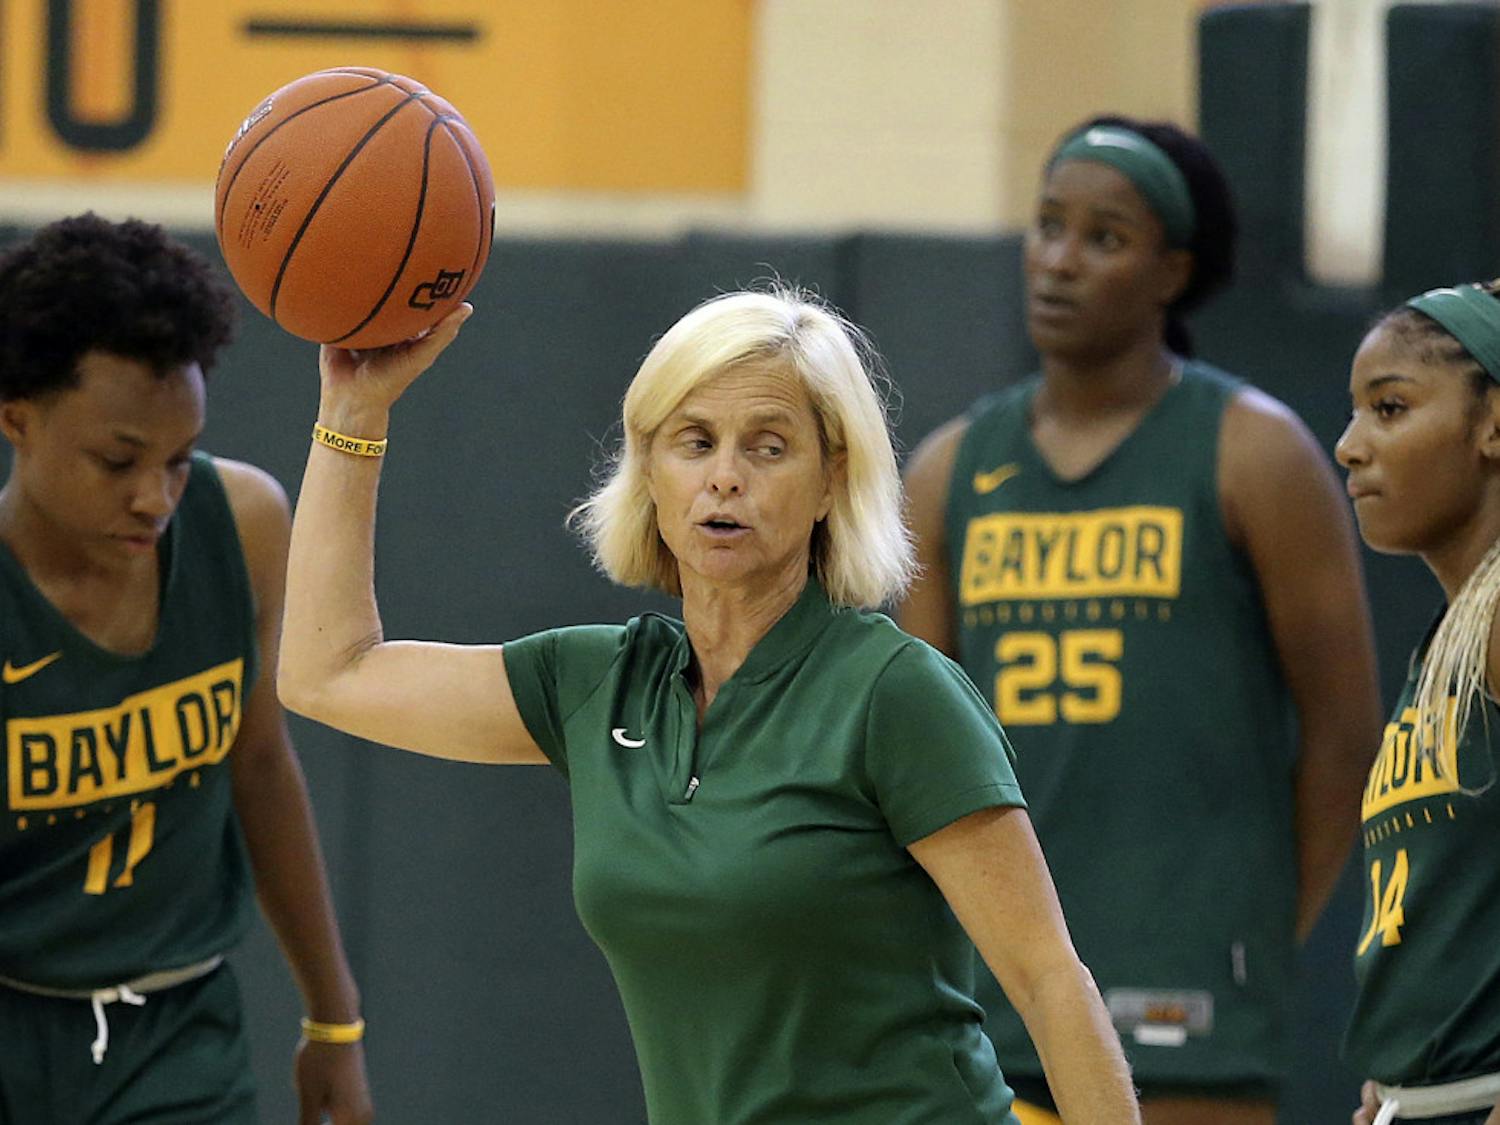 FILE - In this Sept. 30, 2019, file photo, Baylor women's coach Kim Mulkey, center, talks with players during the NCAA college basketball team's practice in Waco, Texas. The NCAA Division I Council on Wednesday, June 17, 2020, approved a plan to allow college basketball players to start working with their coaches for the first time since the pandemic wiped out March Madness. The summer access period for men's and women's players will begin July 20. (Jerry Larson/Waco Tribune-Herald via AP, File)